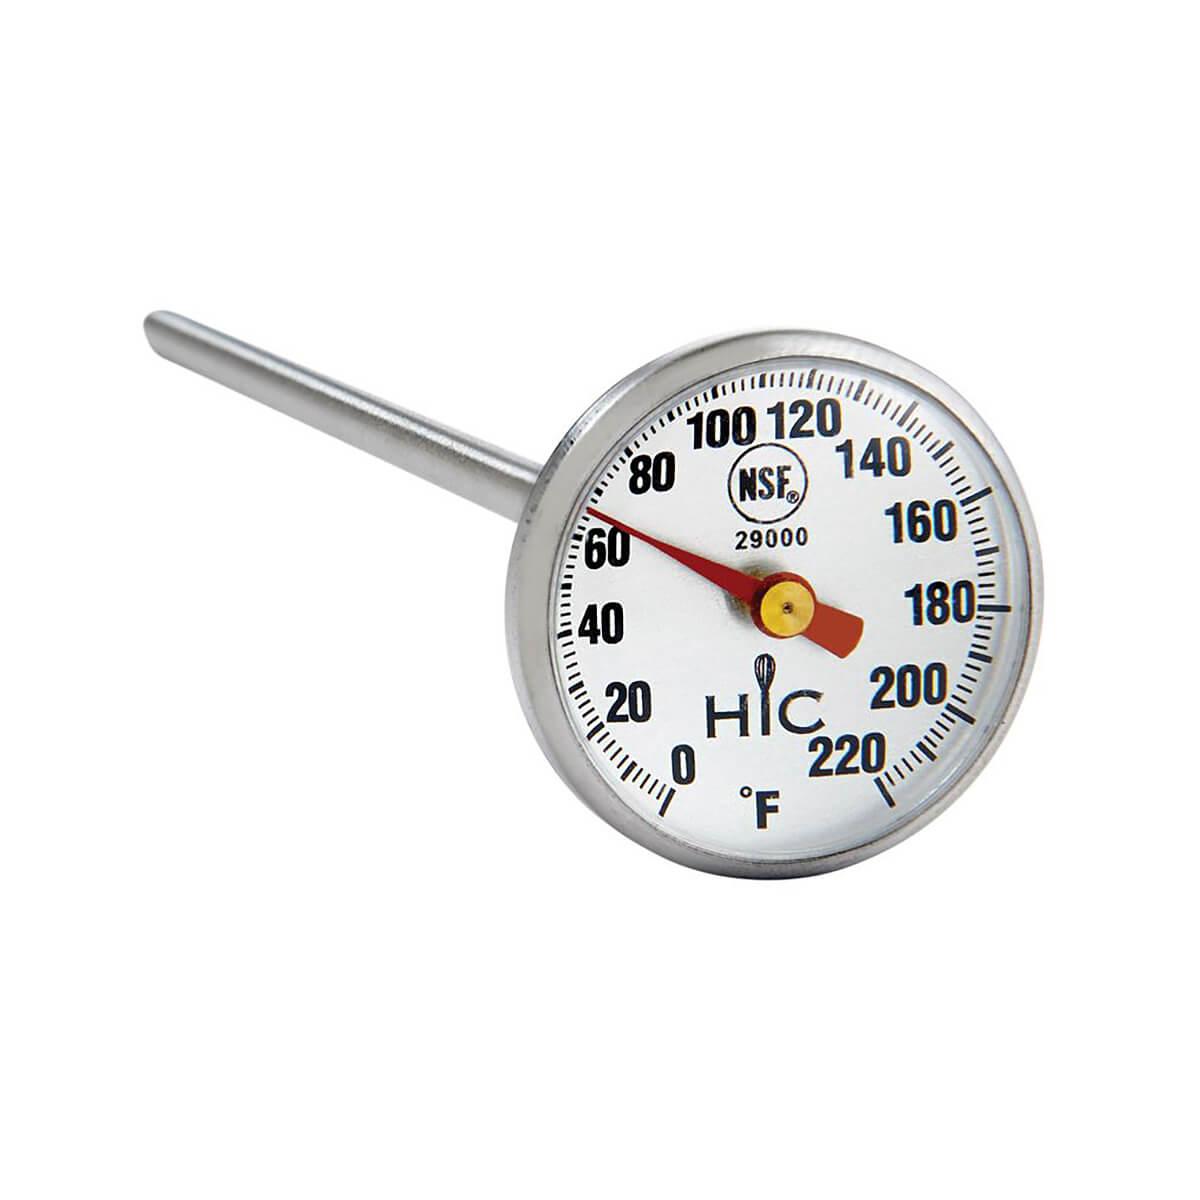 Analog Meat Thermometer